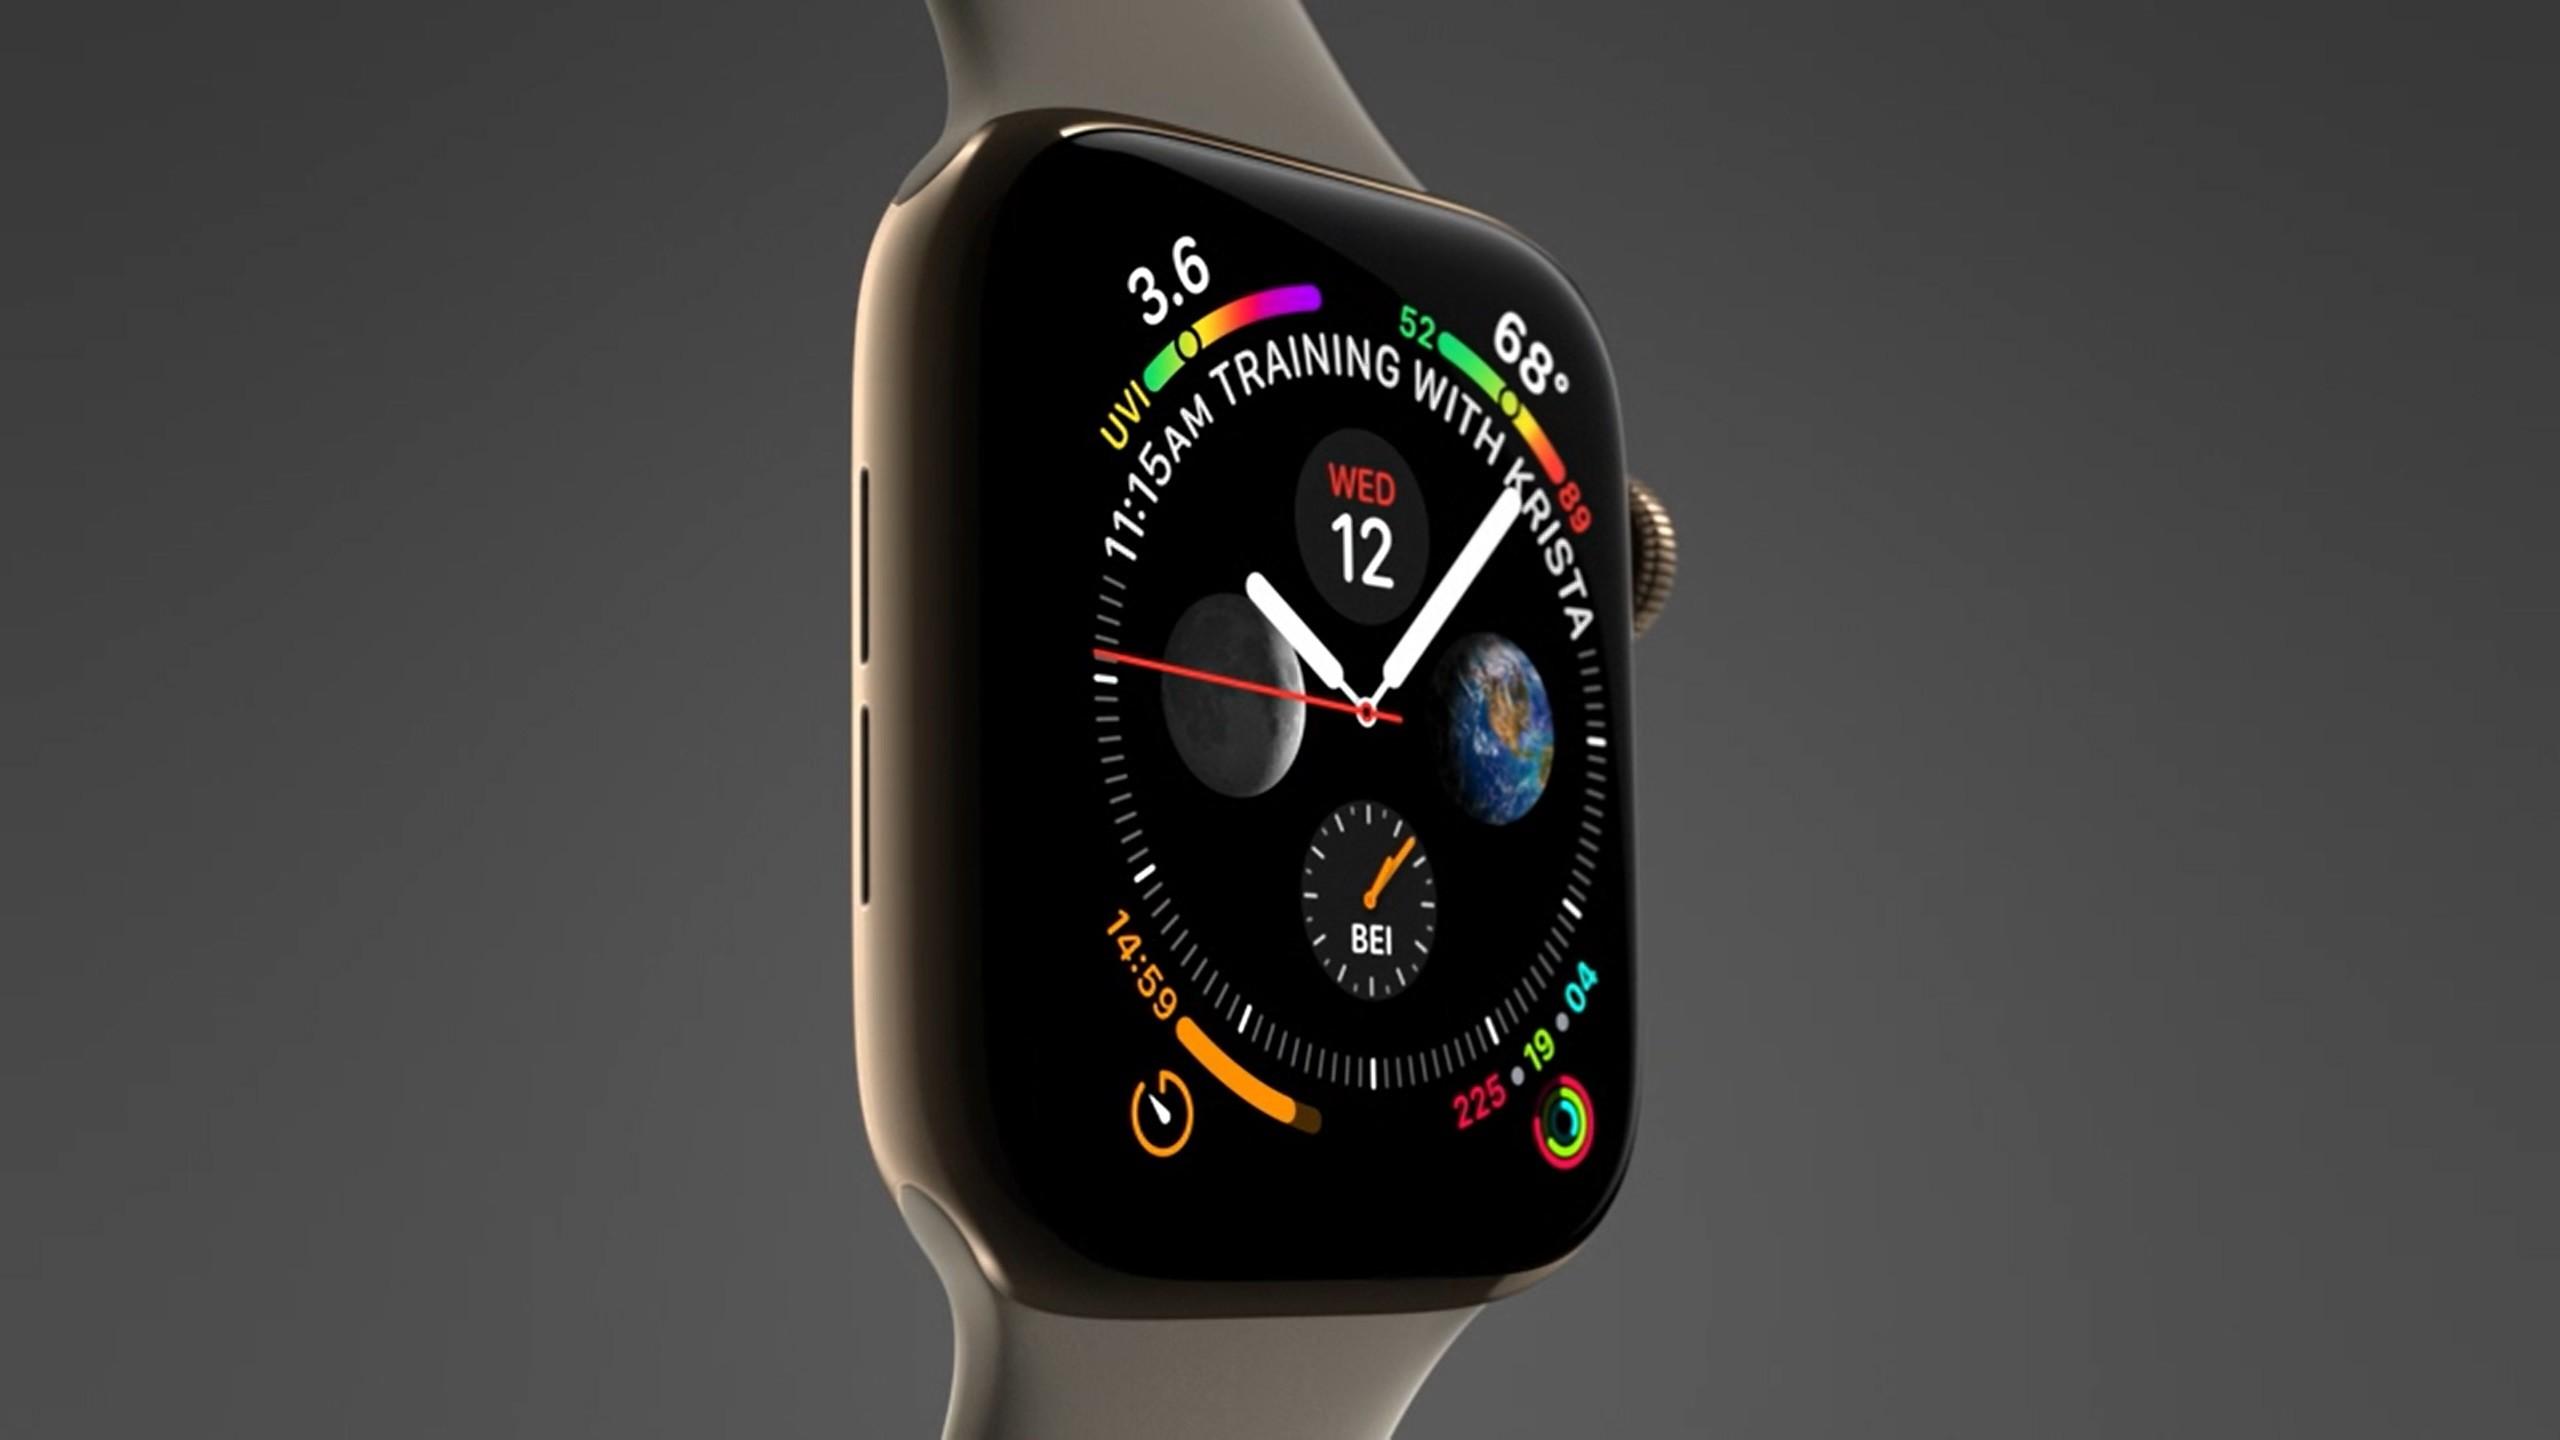 2560 x 1440 · jpeg - Apple Watch Series 4 announced with larger displays - Neowin